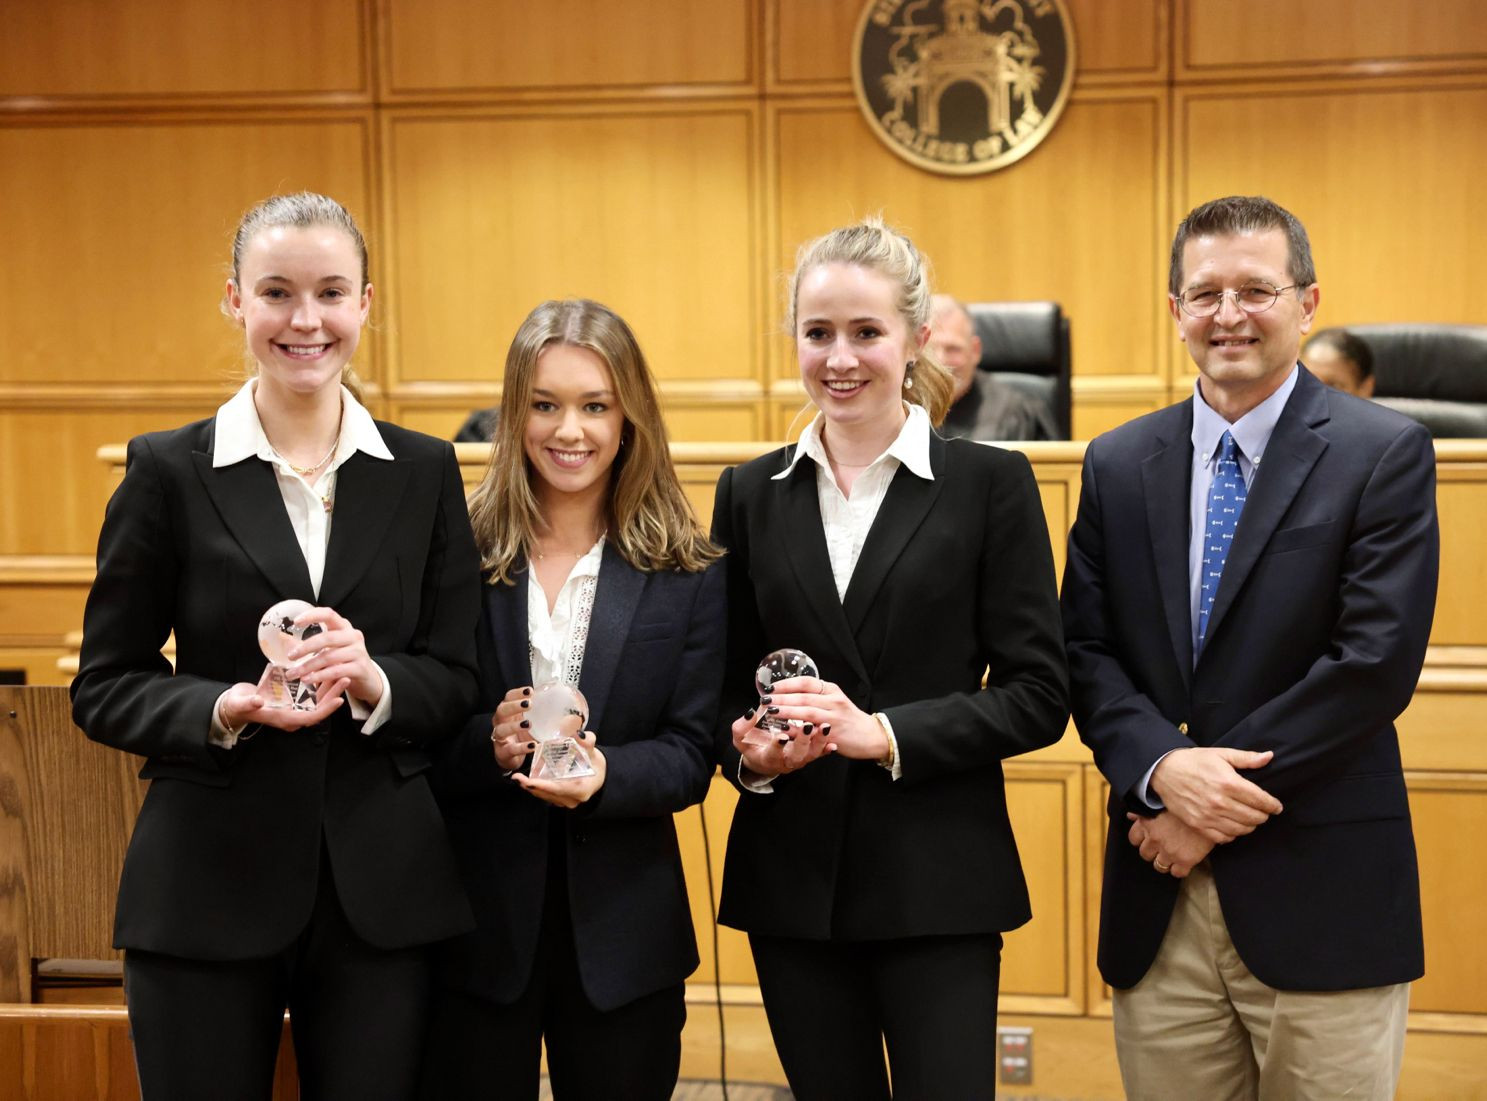 #InPictures: Law Society team takes silver in environmental moot